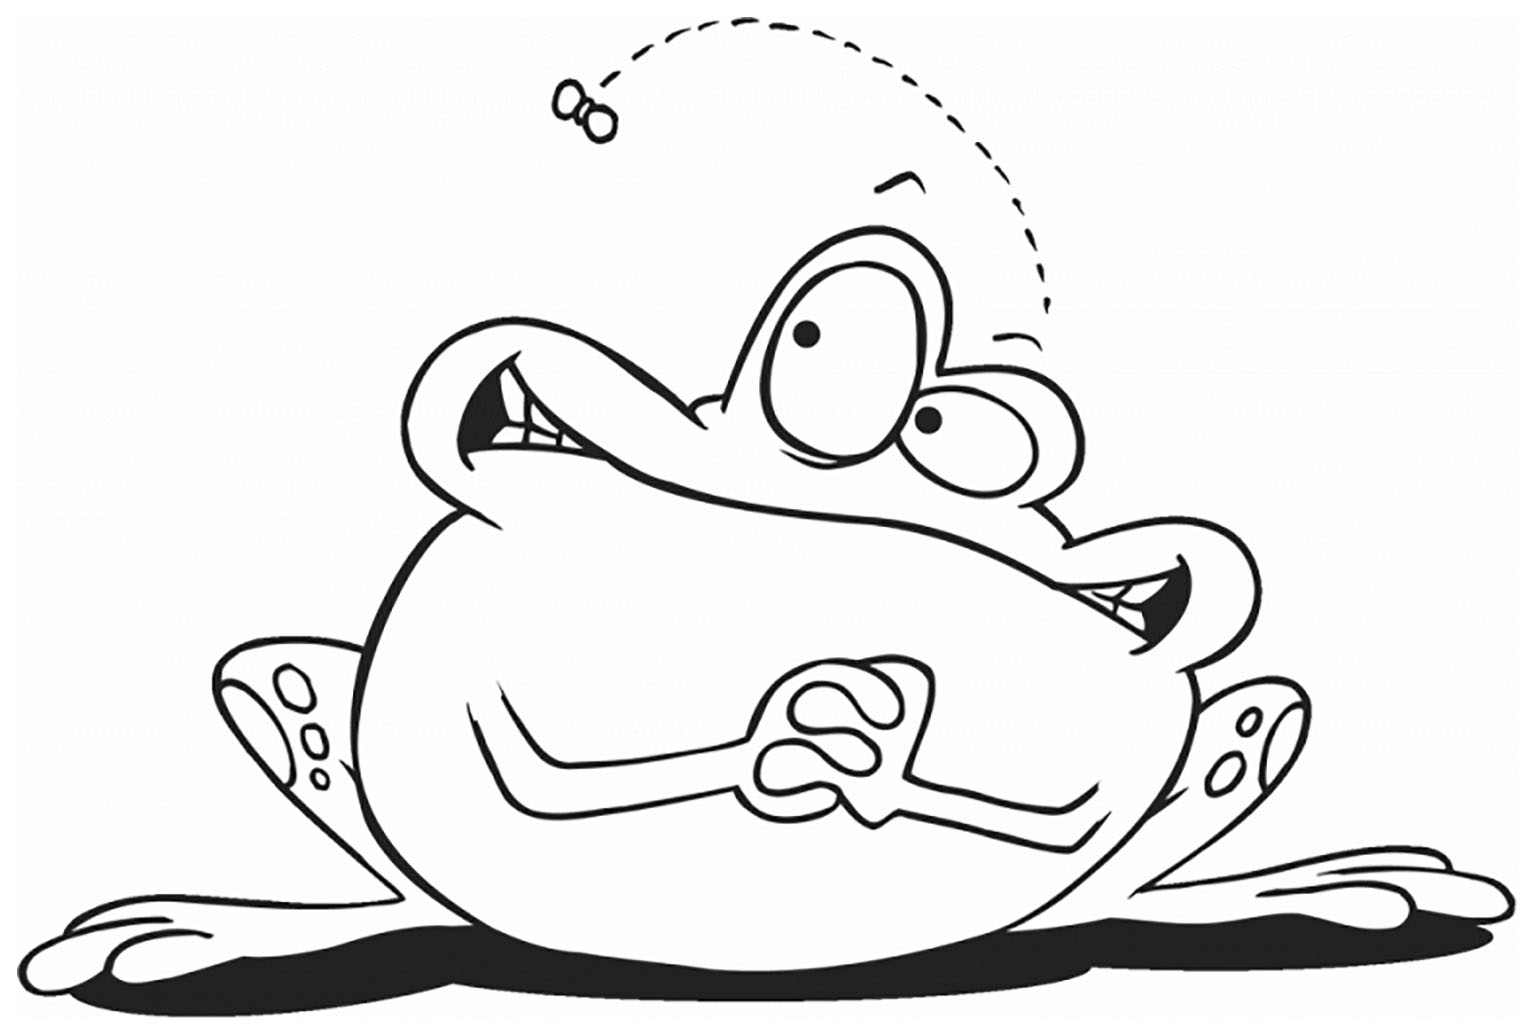 Frog drawing to download and print for children